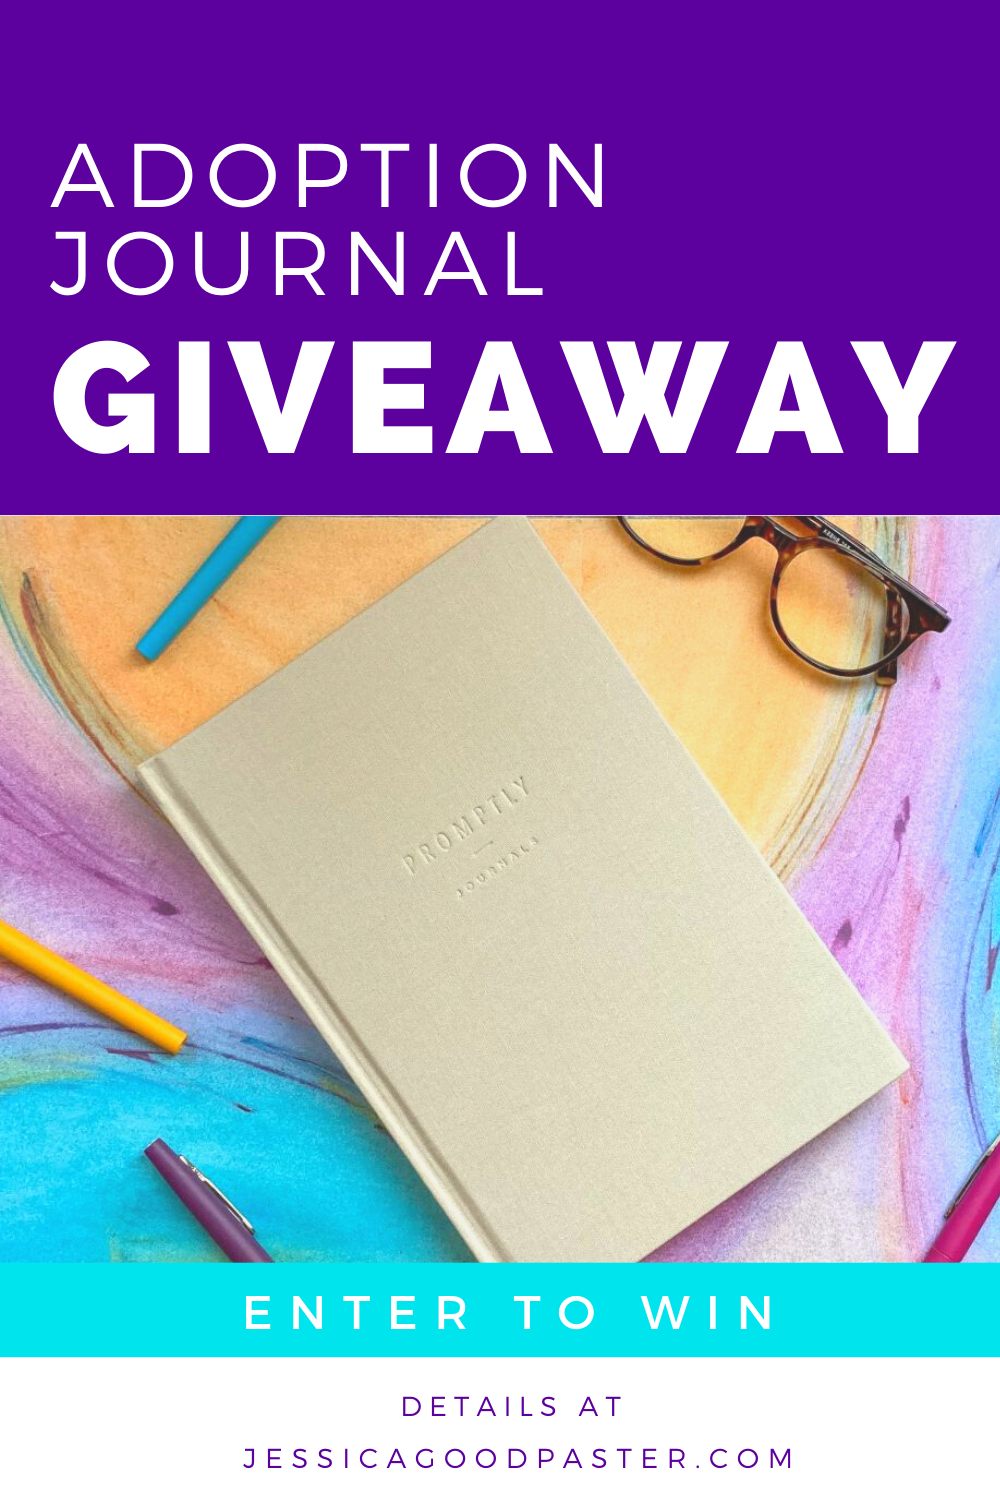 Enter to win a beautiful Adoption History Journal from Promptly Journals! Track the adoption process, journey, and childhood history of your adopted child in this unique journal. Perfect for your domestic newborn adoption or as a gift. Valued at over $30! #giveaway #adoption #journal #adoptionjournal #babybook #gift #adoptionjourney